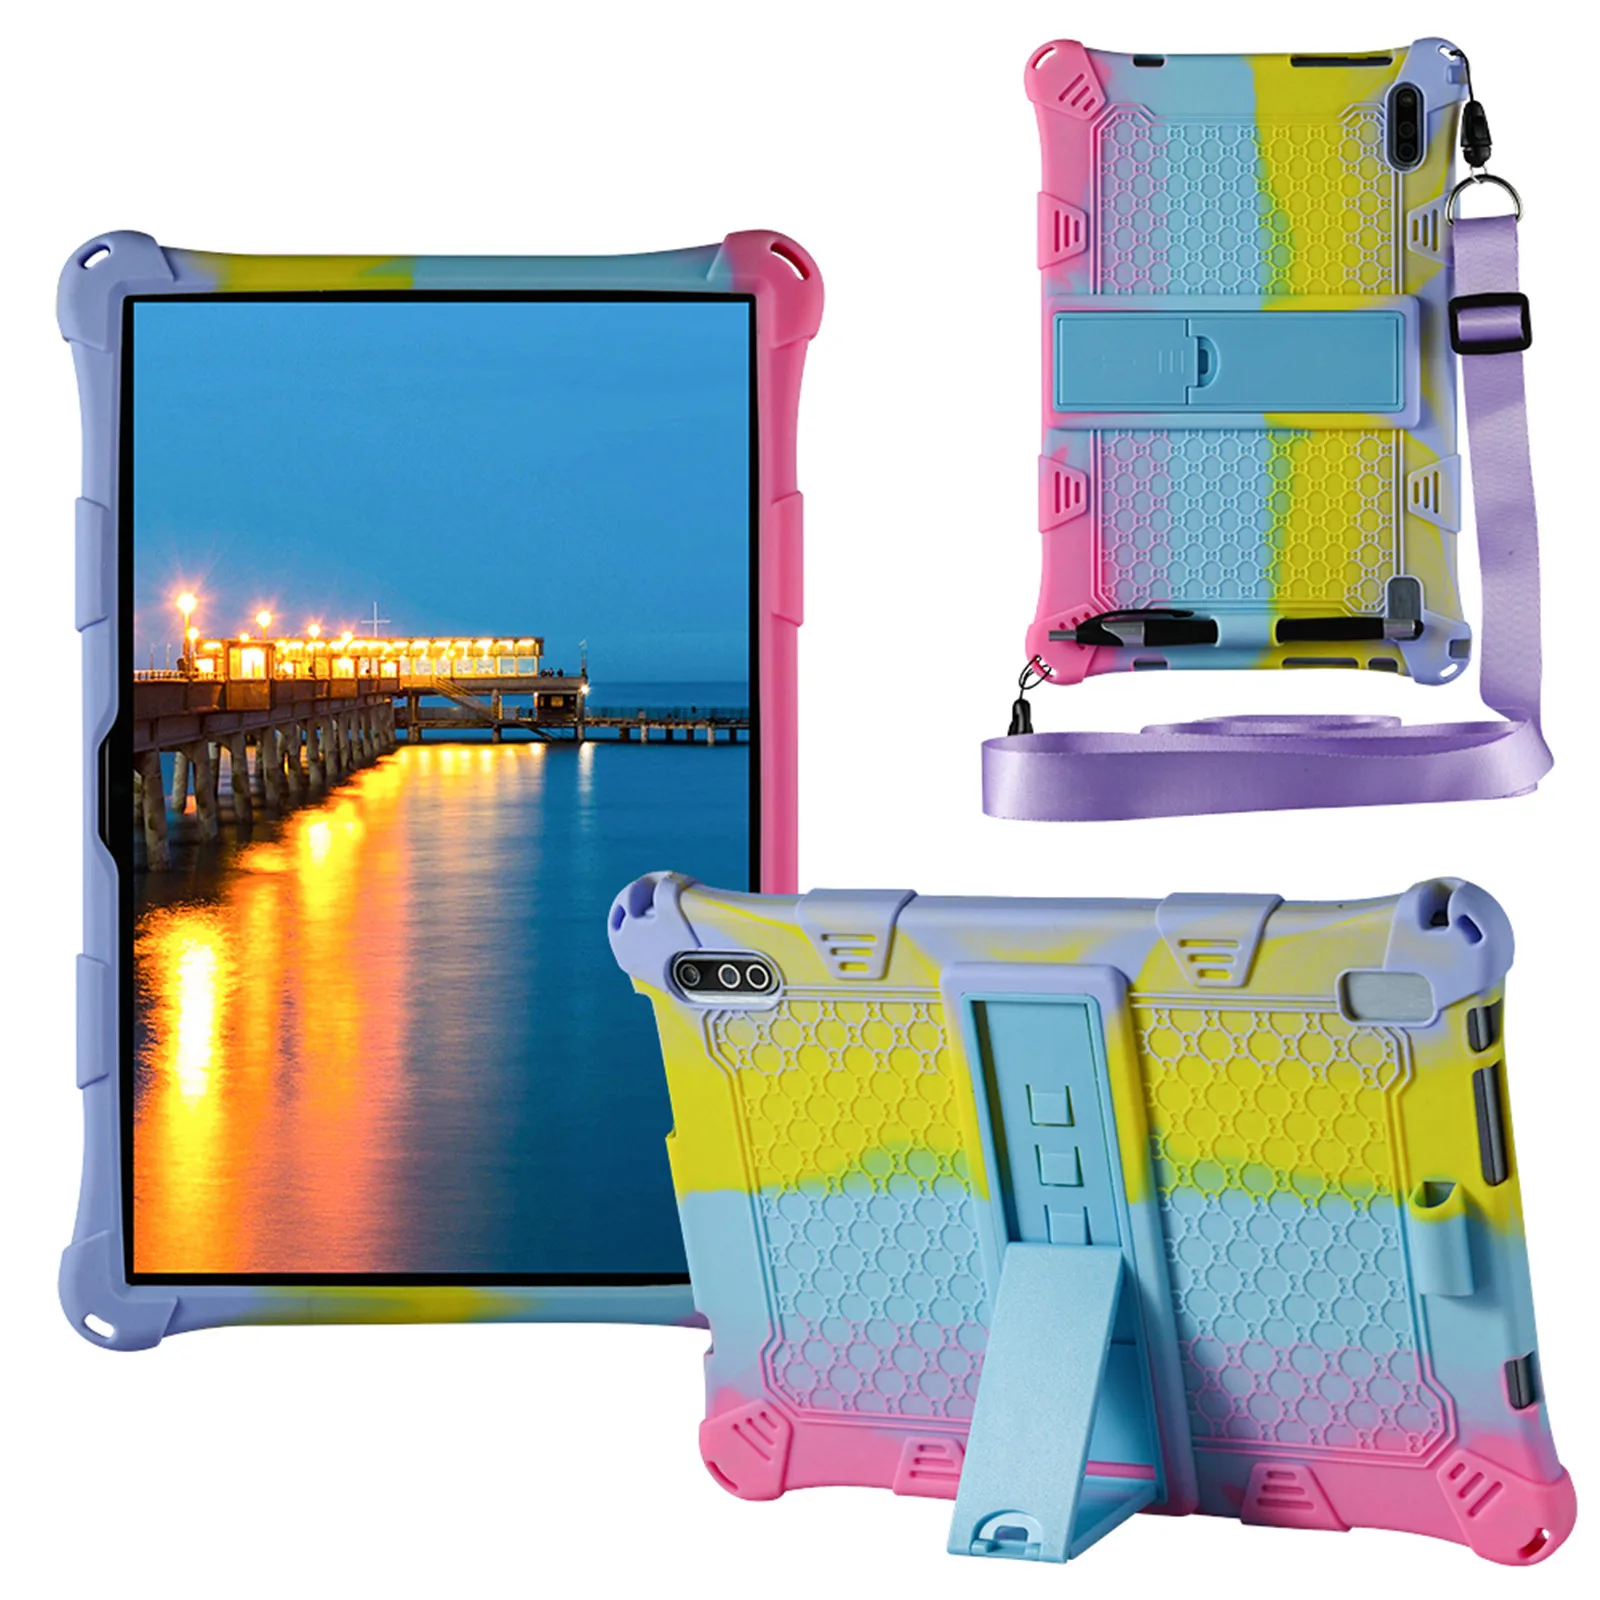 Case for VASTKING KingPad K10 / Z10 10 inch Tablet , Soft Silicone Stand Cover for KingPad K10 Pro / MARVUE Pad M10 10.1 inch